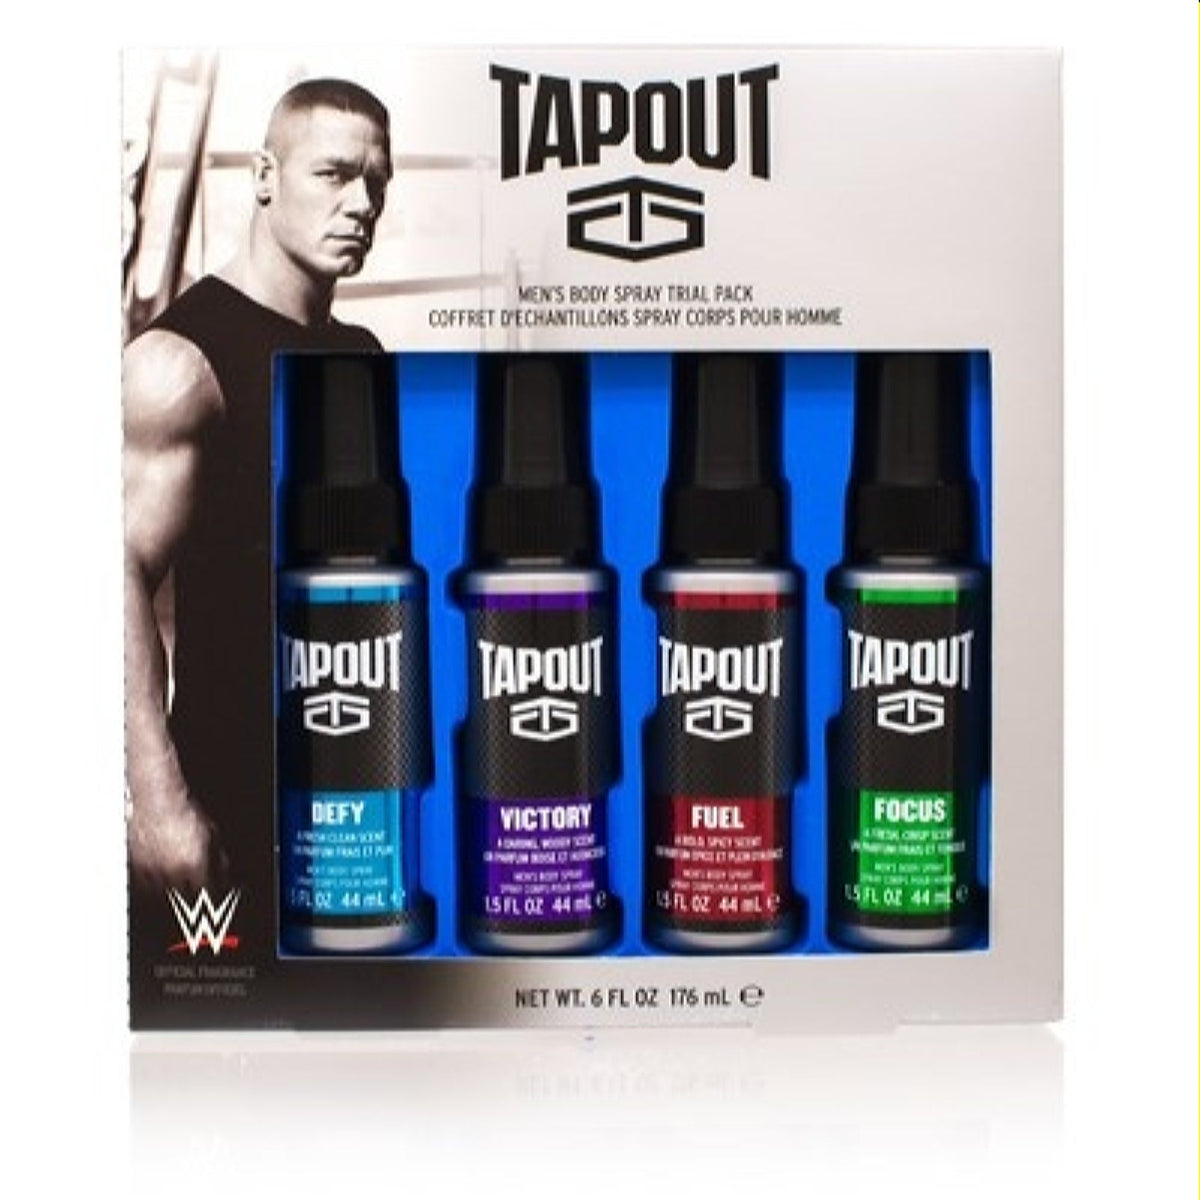 Tapout Tapout Set Box Slightly For Men A0114921